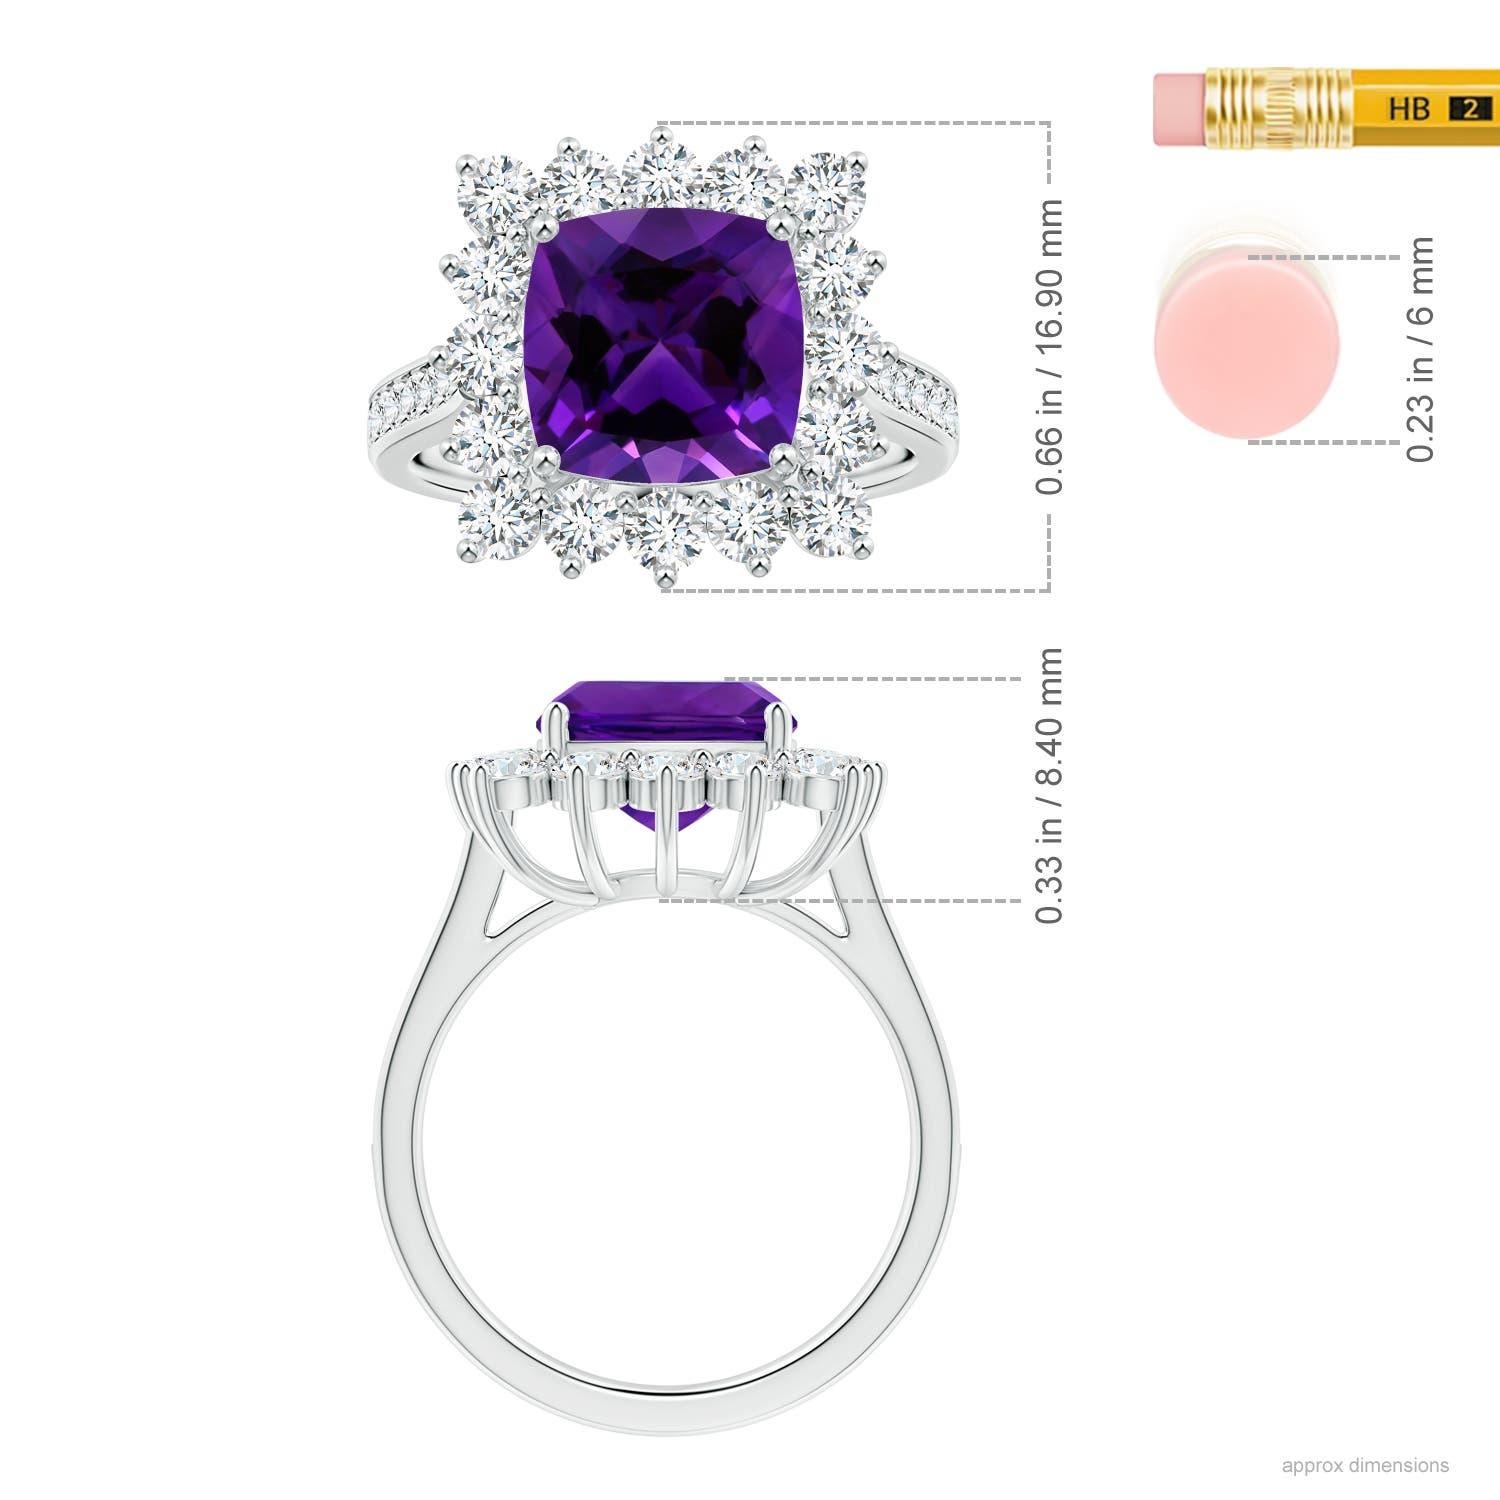 For Sale:  ANGARA Princess Diana Inspired GIA Certified Cushion Amethyst Ring in White Gold 5